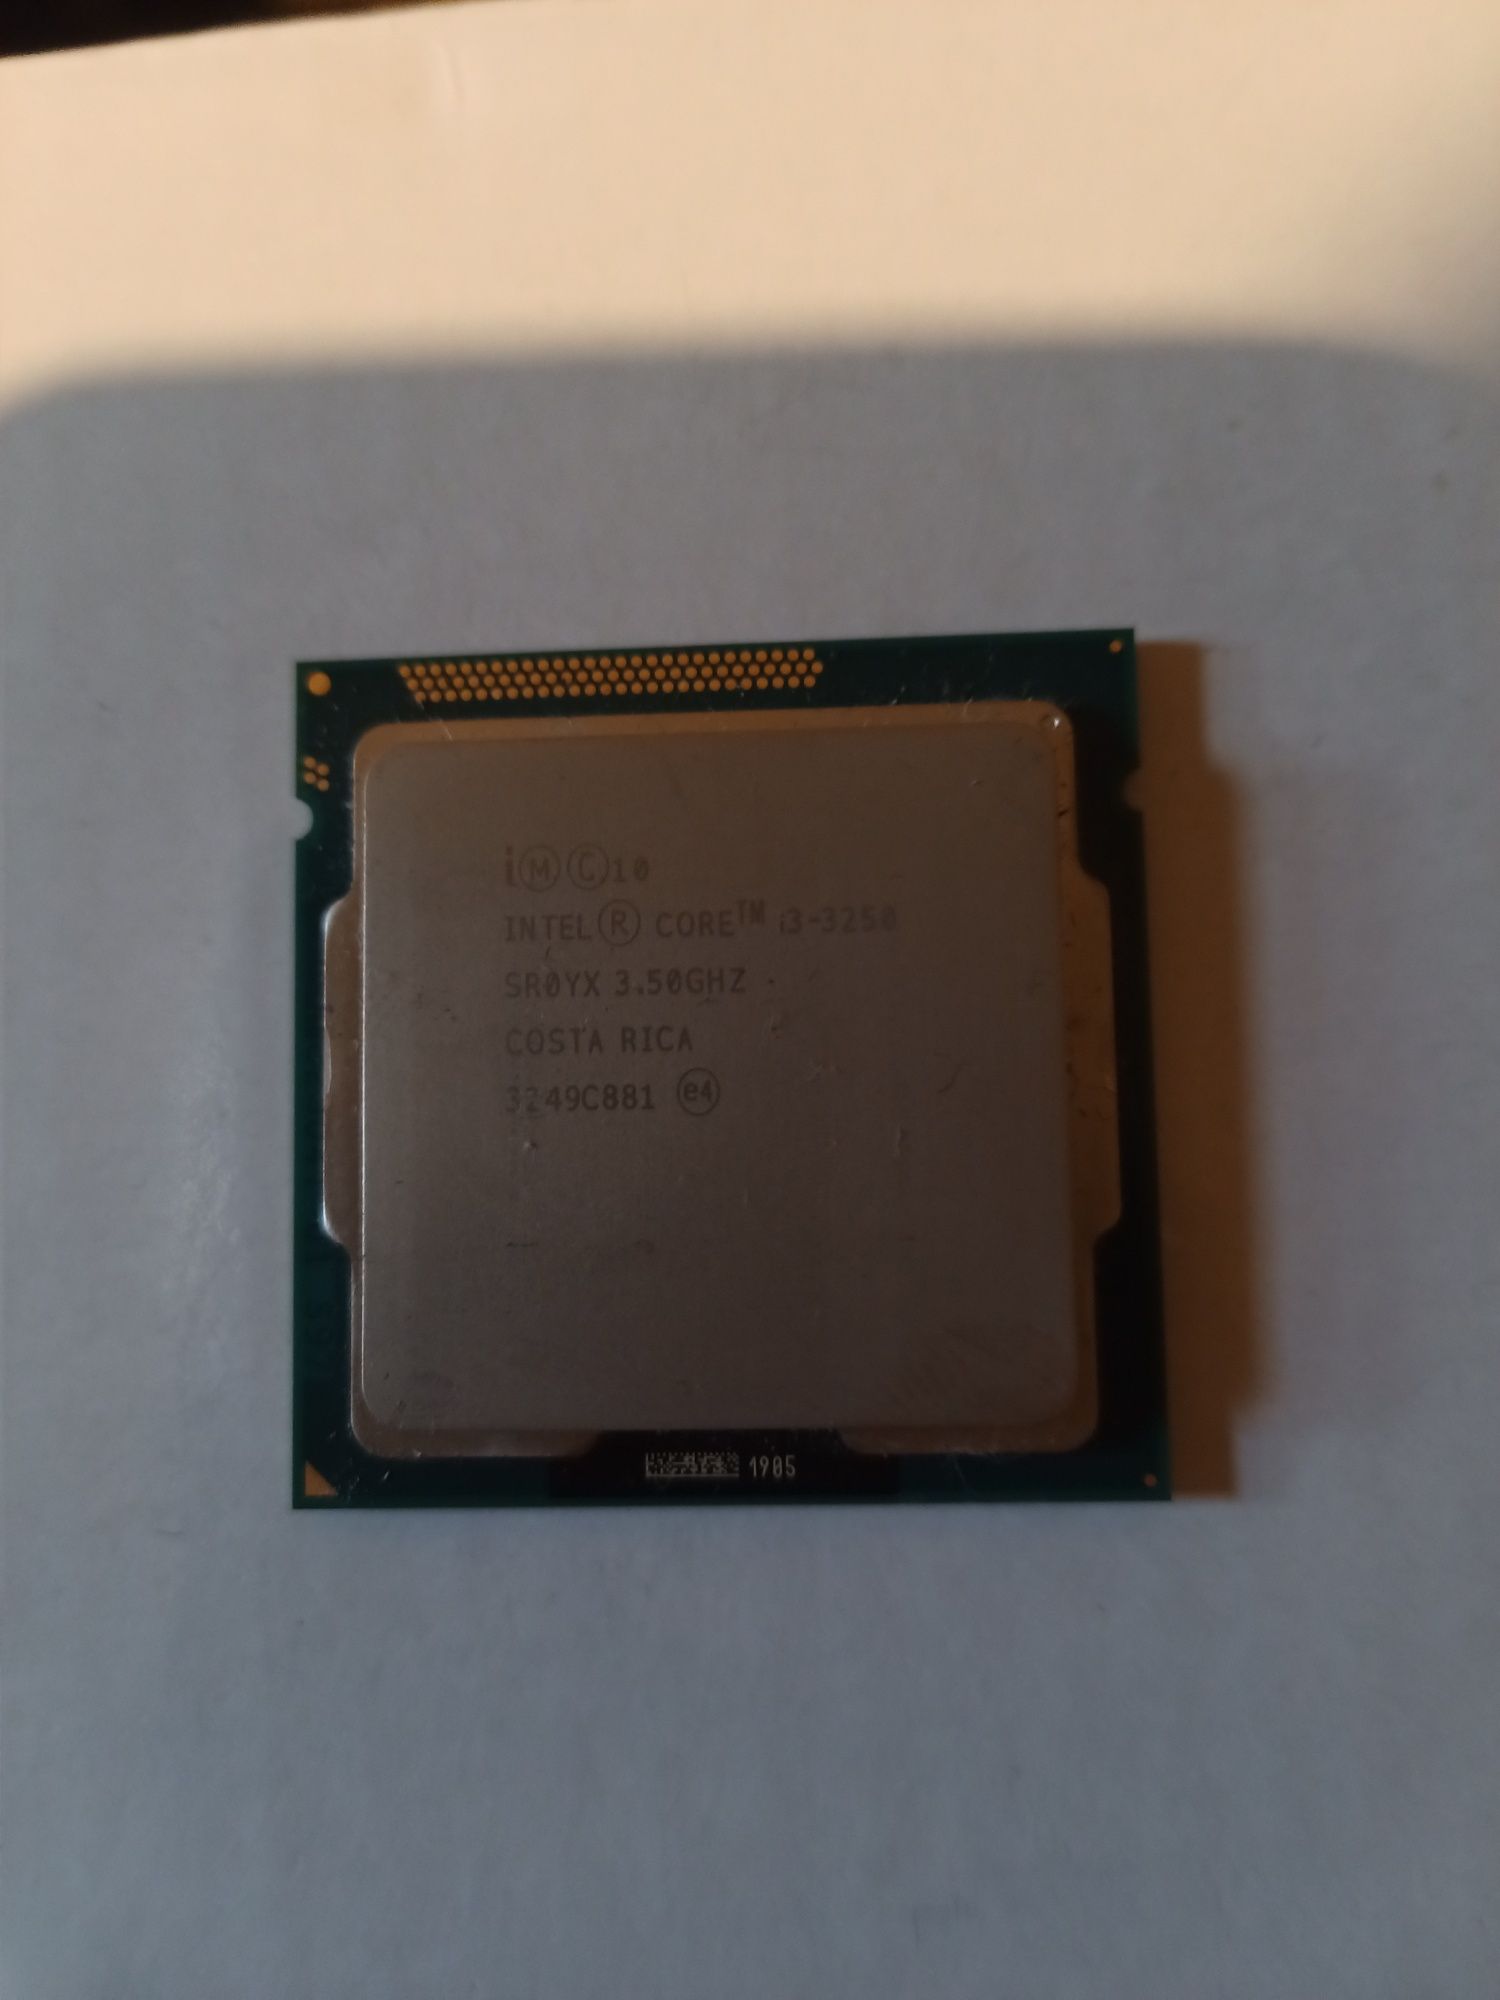 Intel core i3-3250 3.5GHz/5GT/s/3MB